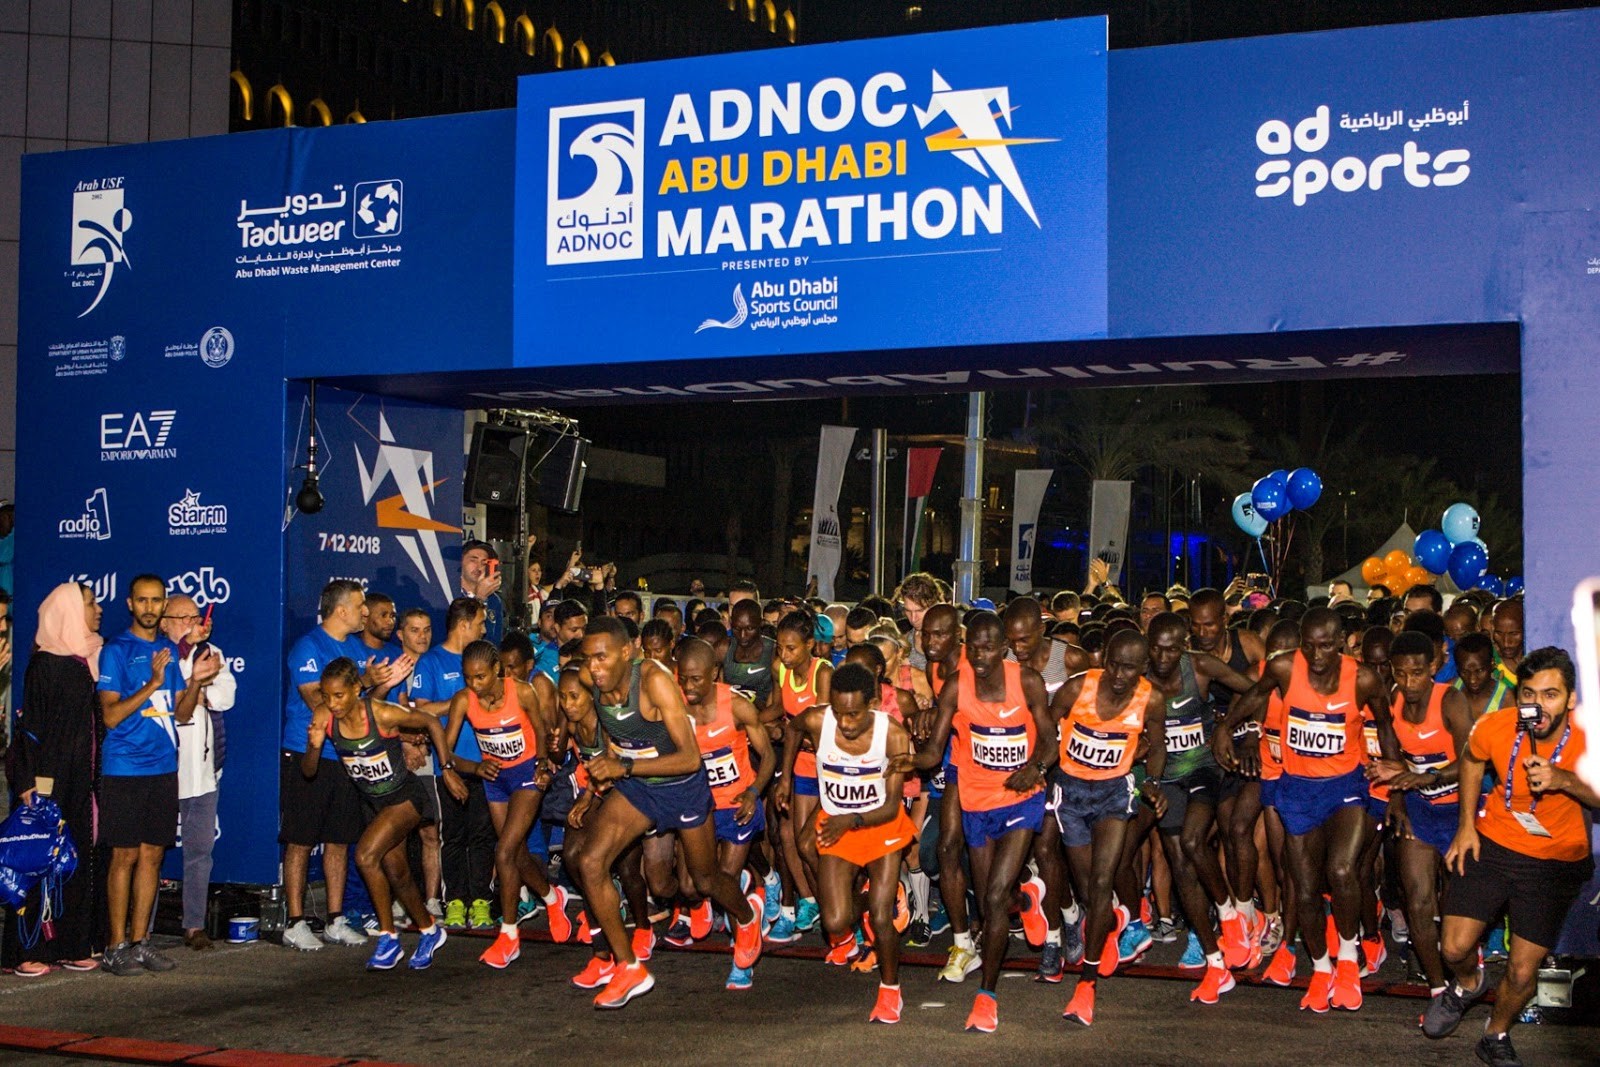 There is prize money of $388,000 to be won at the second Adnoc Abu Dhabi Marathon to be held on December 6